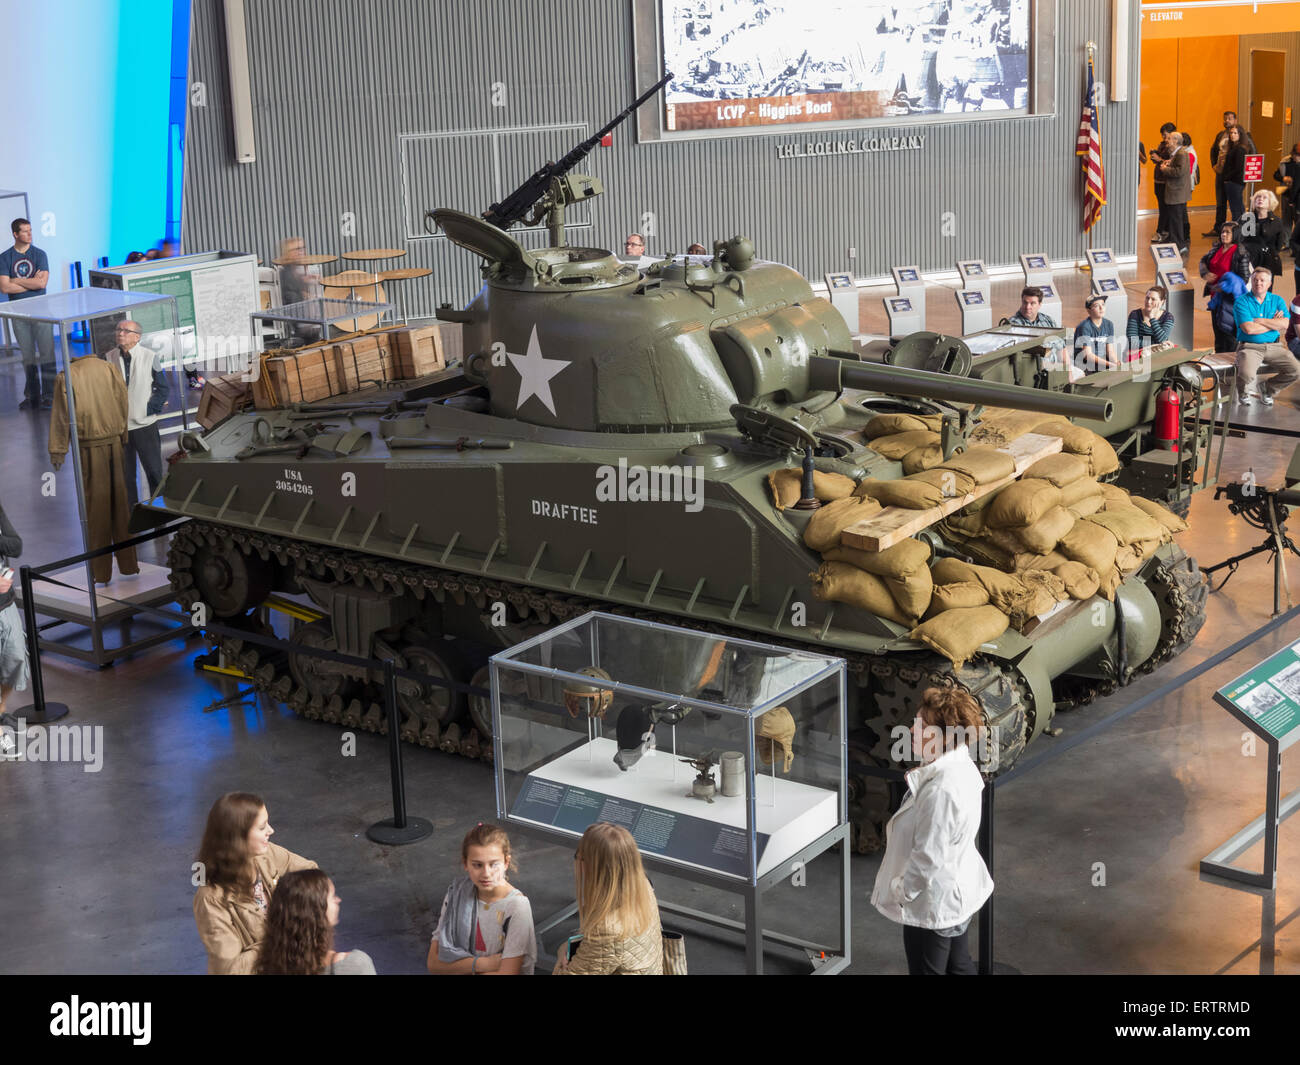 A tank on display inside the National World War Two Museum, New Orleans, Louisiana, USA Stock Photo